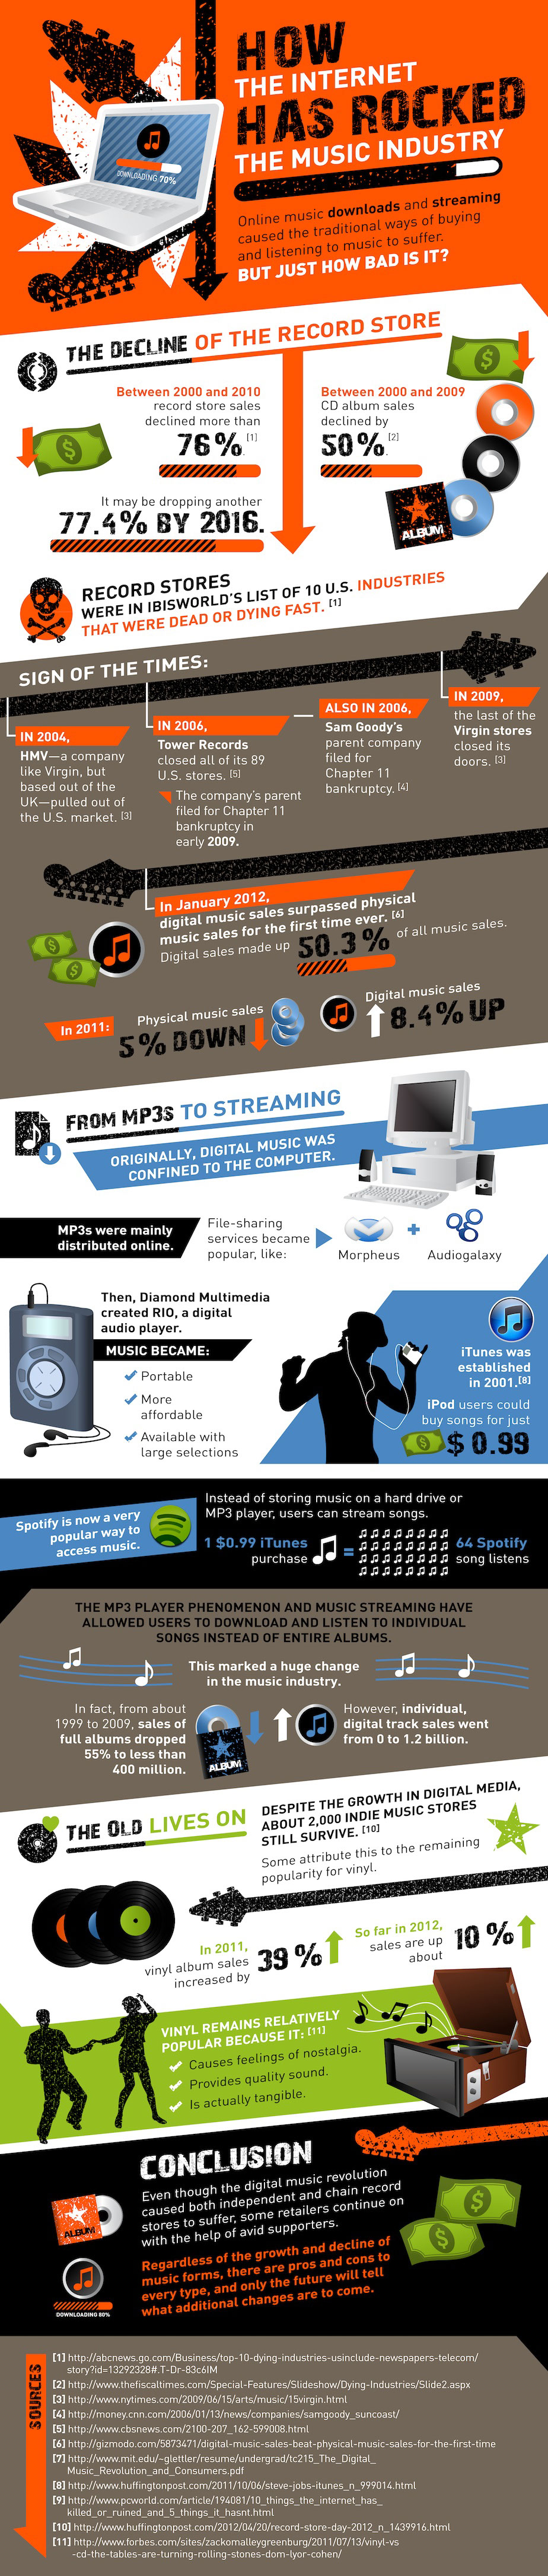 How-The-Internet-Has-Rocked-The-Music-Industry-infographic